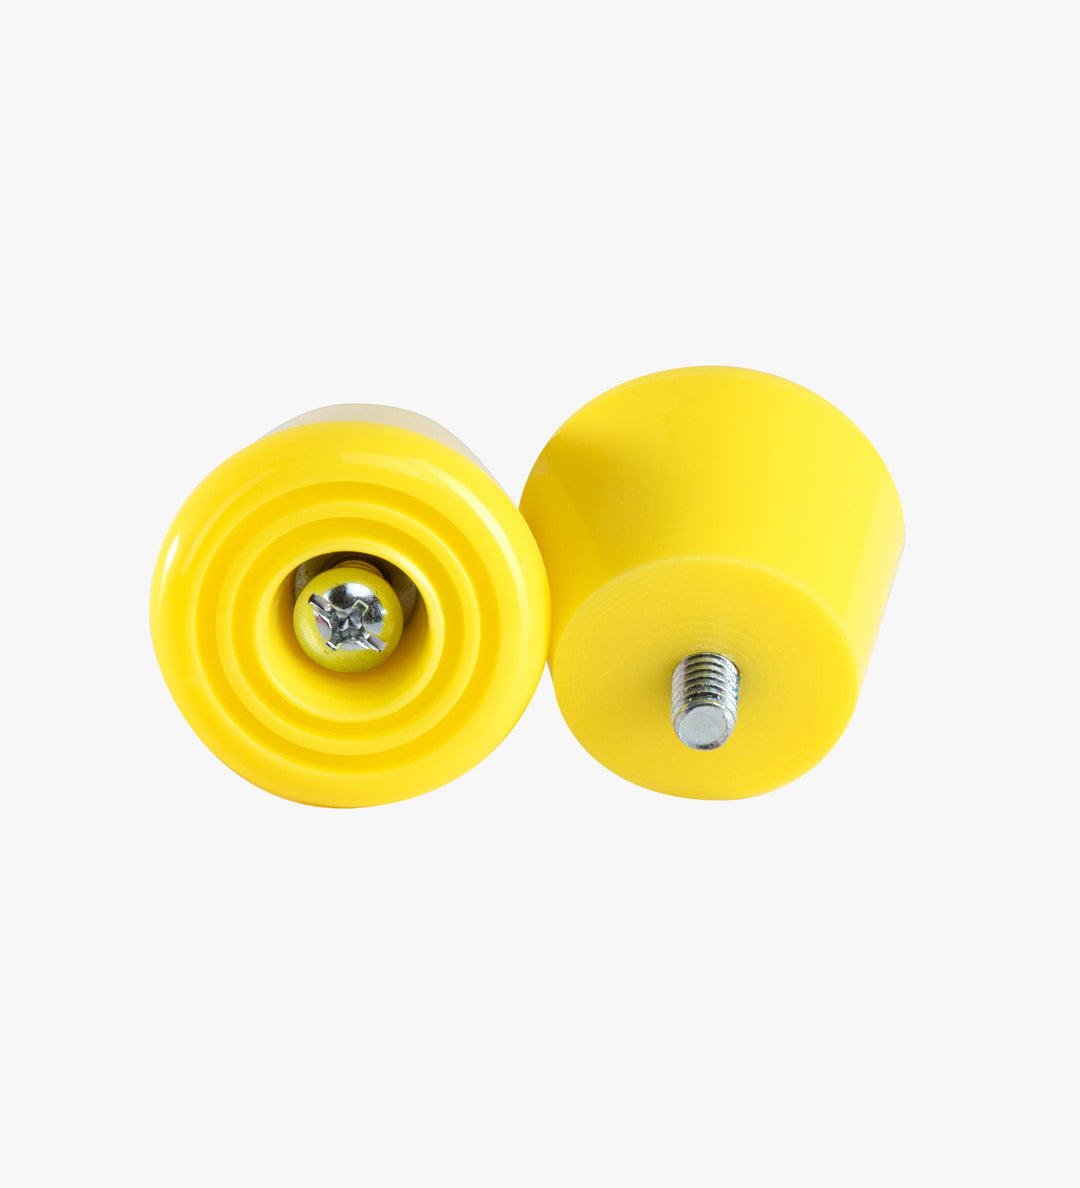  Lemon yellow C7 roller skate stoppers made from durable polyurethane PU82A dimensions are 47 by 35 mm 